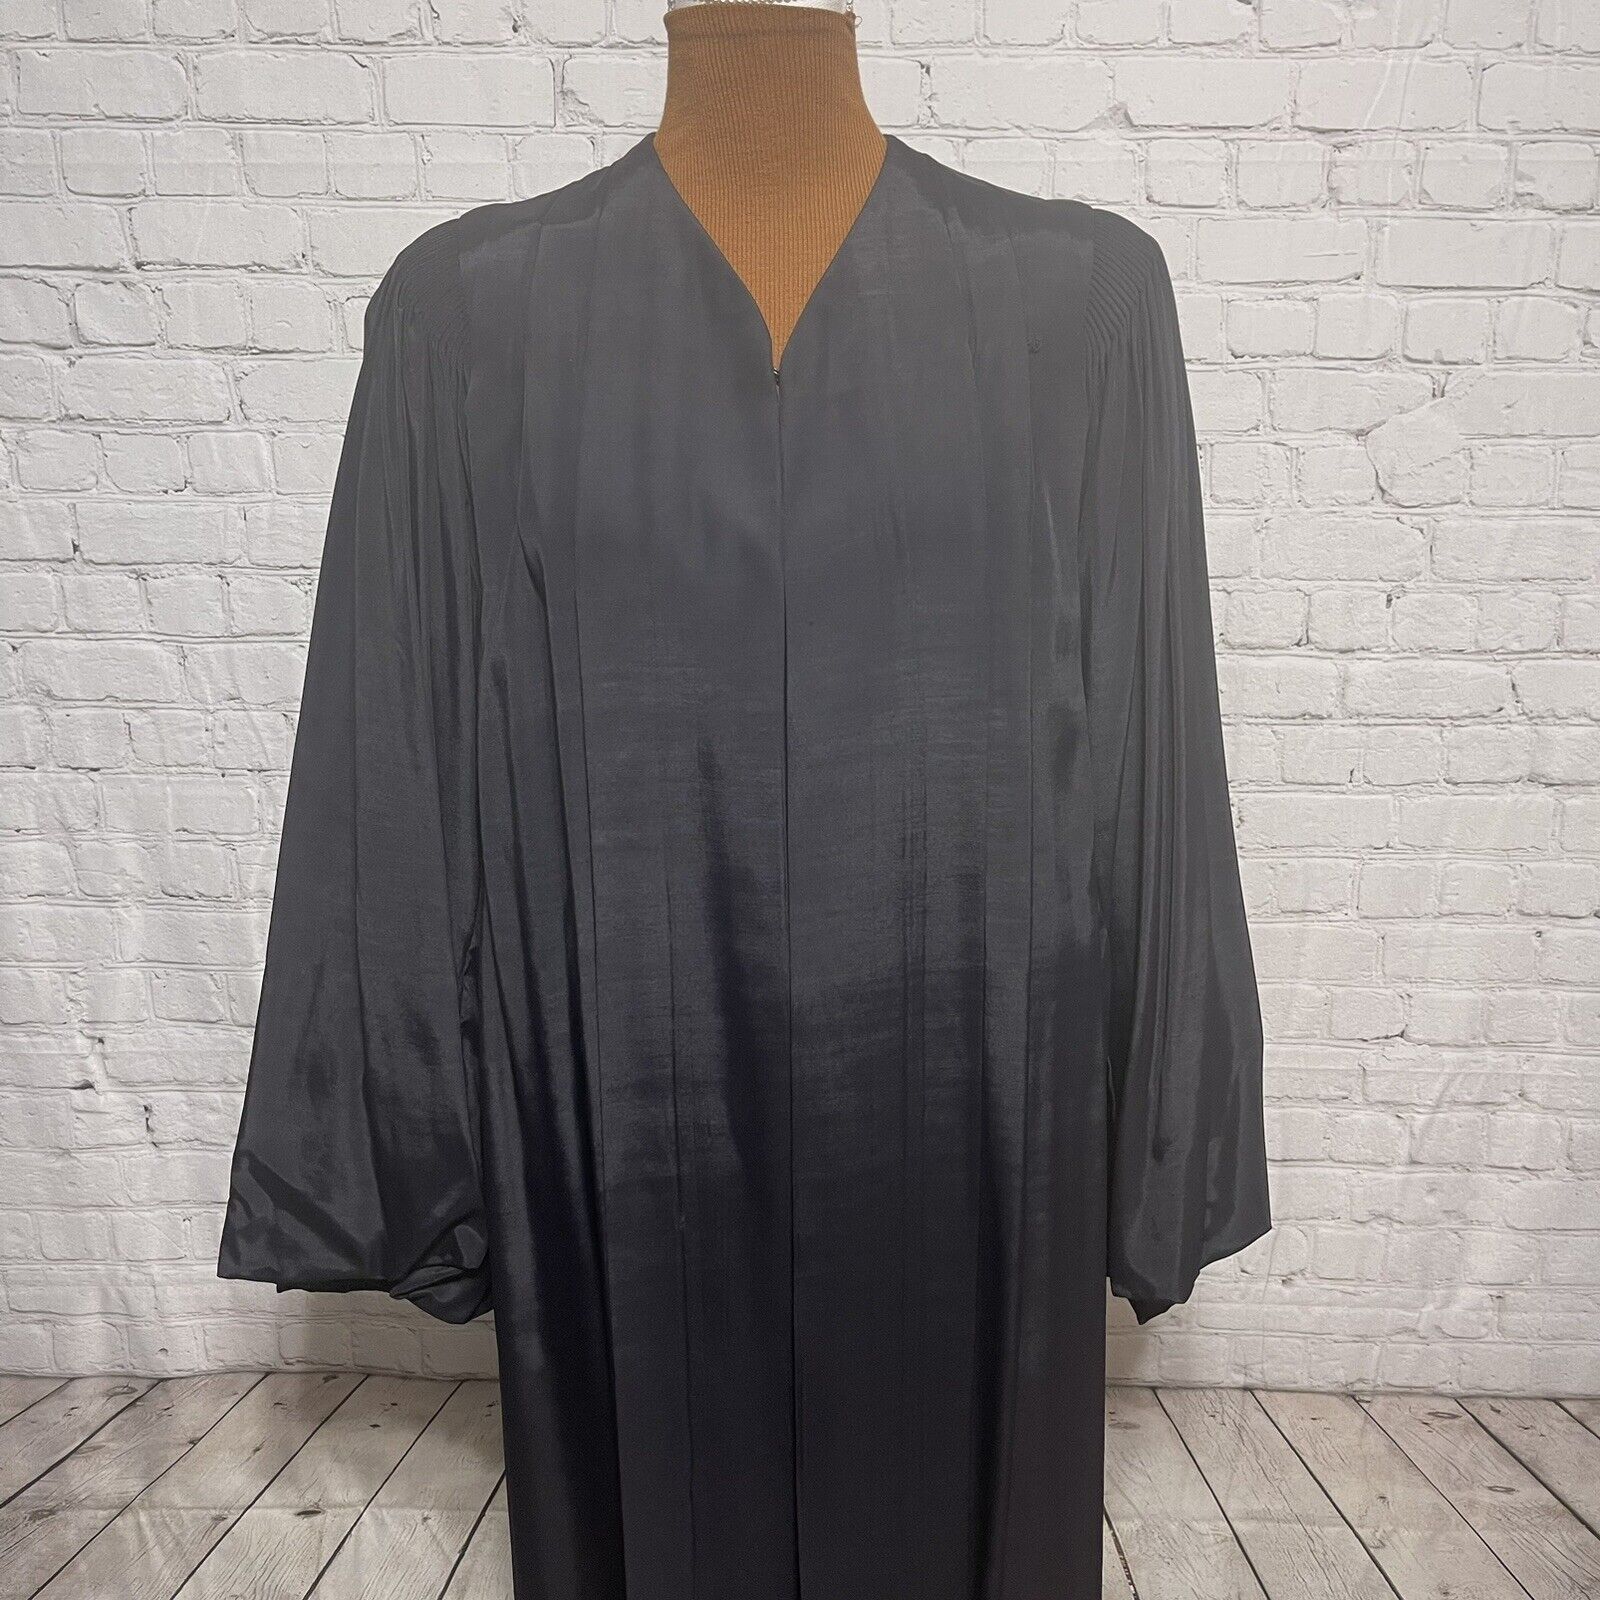 VTG Collegiate Cap and Gown Co Heavy Graduation Ceremony Gown Black OSFM FLAWS